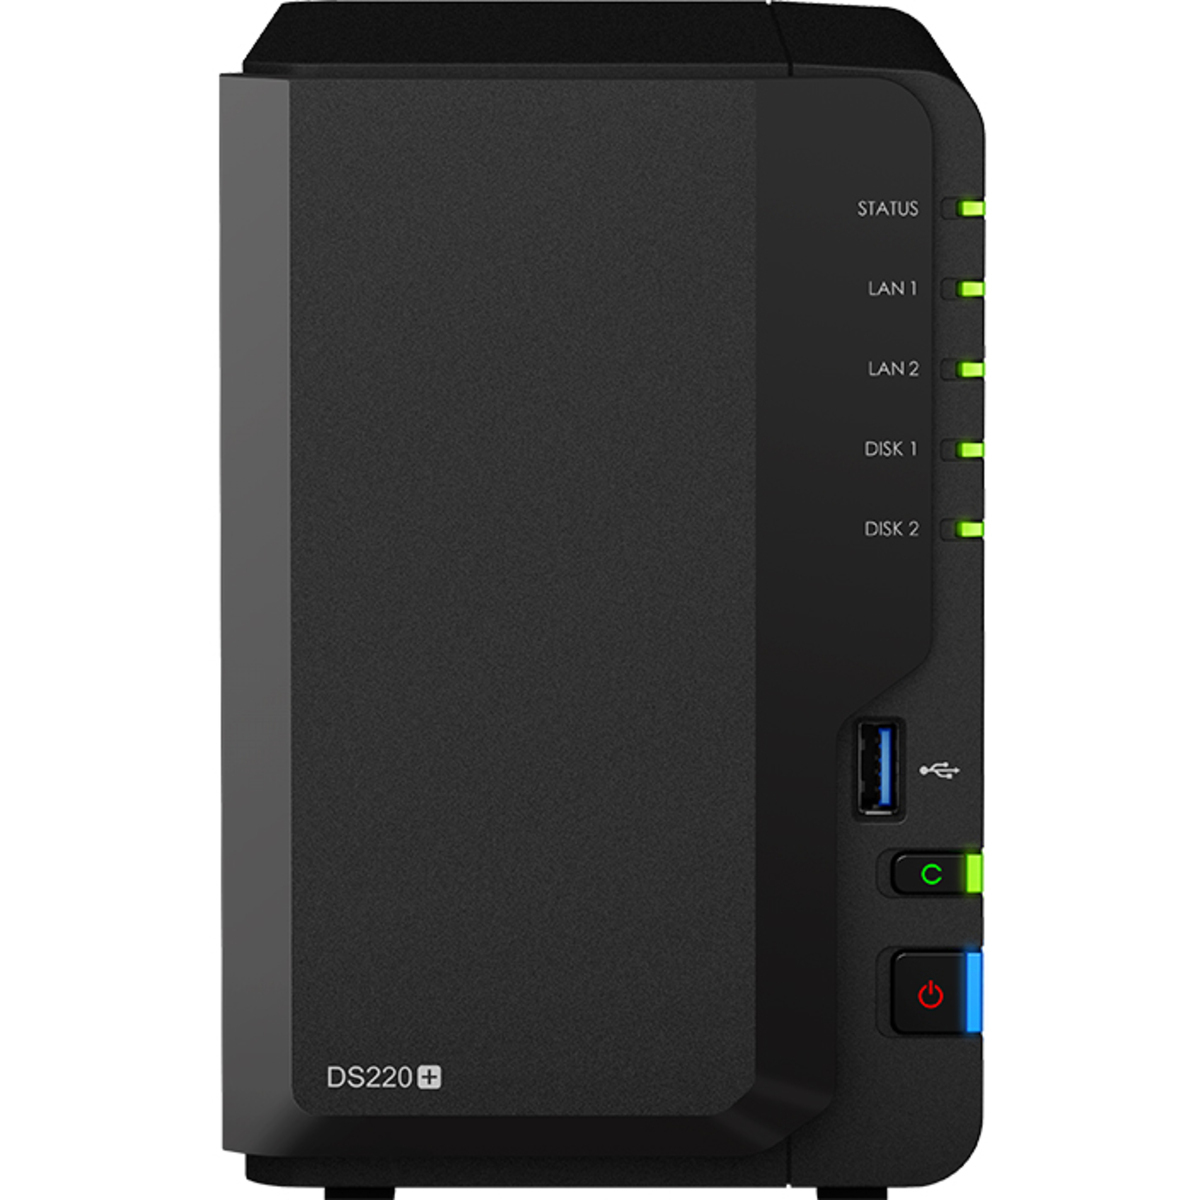 buy Synology DiskStation DS220+ Desktop NAS - Network Attached Storage Device Burn-In Tested Configurations - FREE RAM UPGRADE - nas headquarters buy network attached storage server device das new raid-5 free shipping usa christmas new year holiday sale DiskStation DS220+